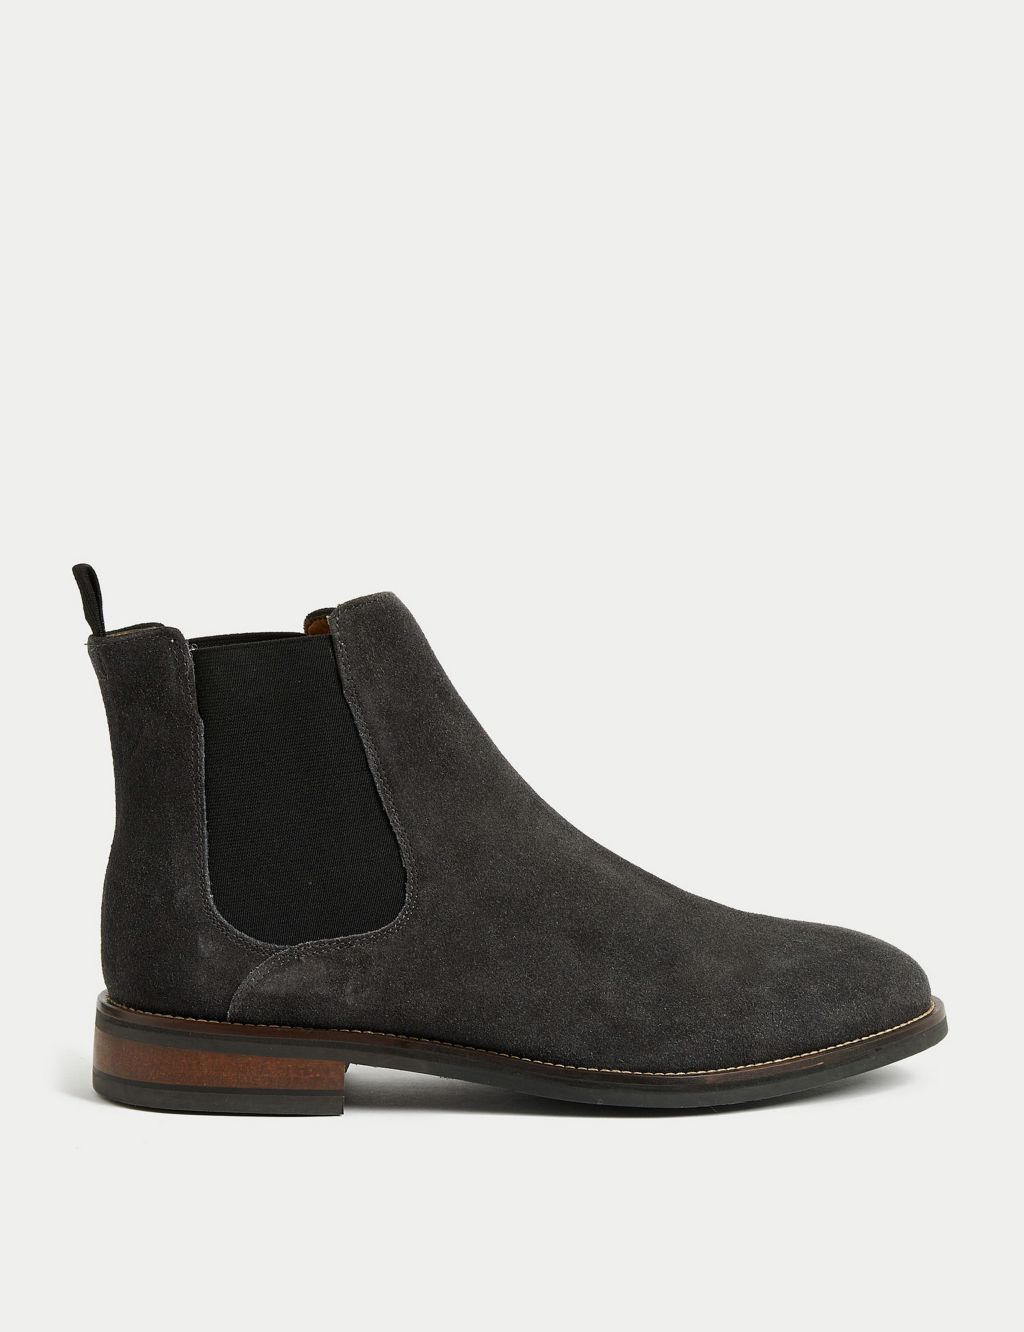 Wide Fit Suede Pull-On Chelsea Boots image 1